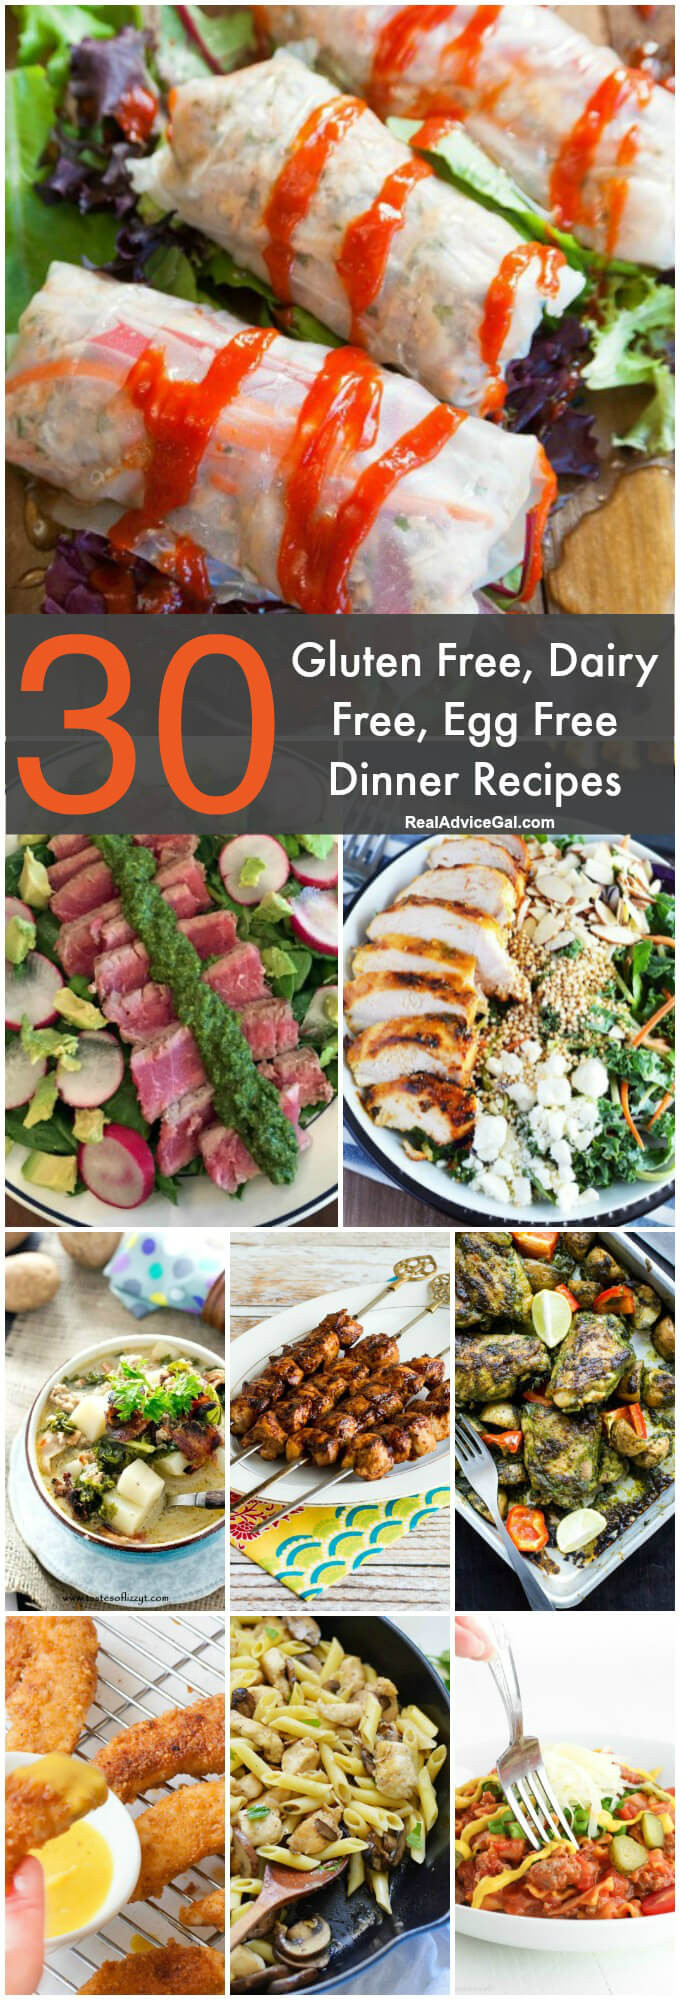 Gluten Free Soy Free Dairy Free Egg Free Recipes
 Gluten Free Dairy Free Egg Free Recipes Madame Deals